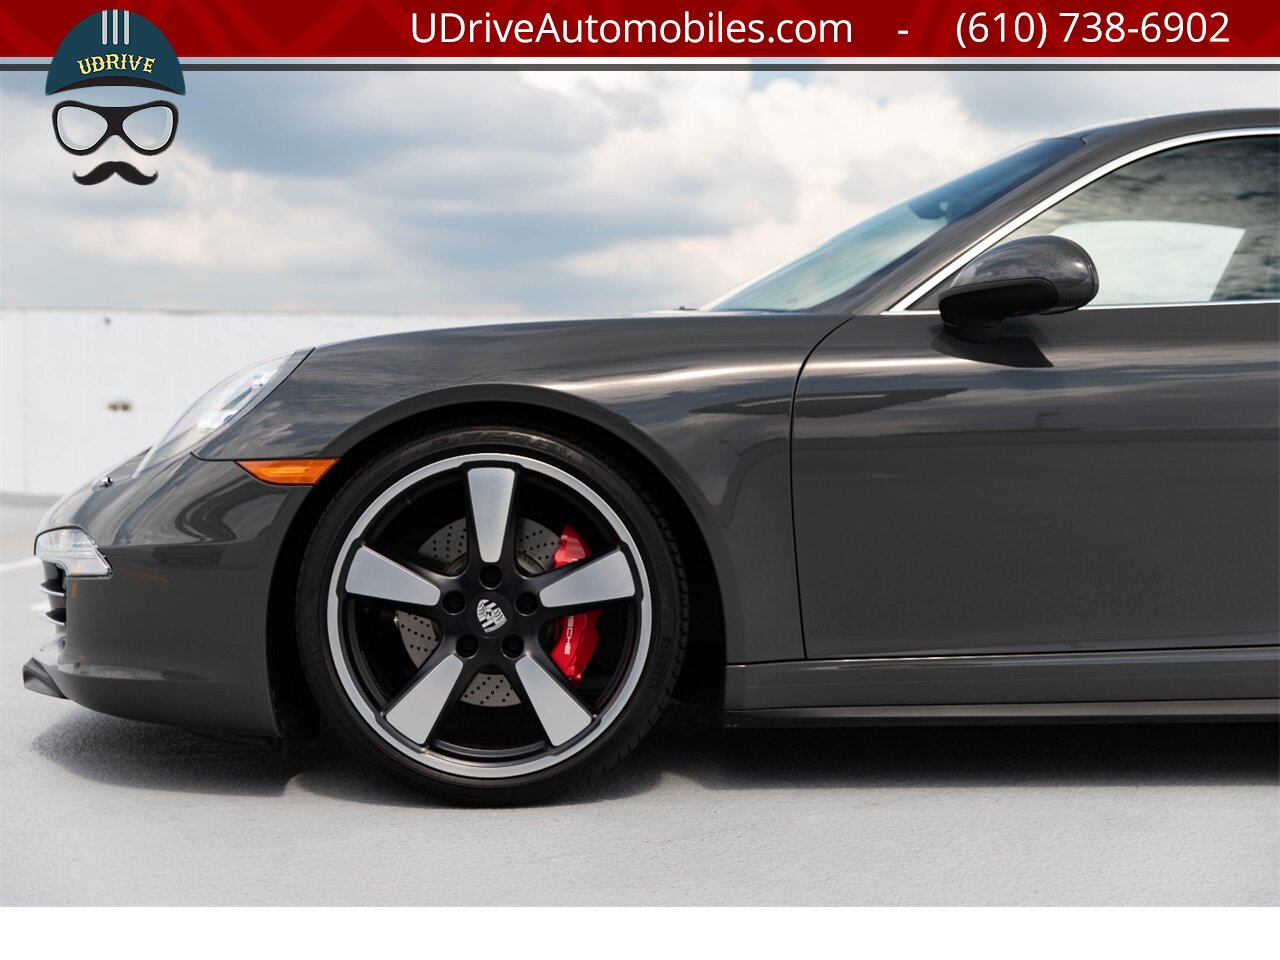 2014 Porsche 911 Carrera S 50th Anniversary Edition Certified  CPO Warranty thru 12/26/21 Full Front End Clear Film - Photo 7 - West Chester, PA 19382